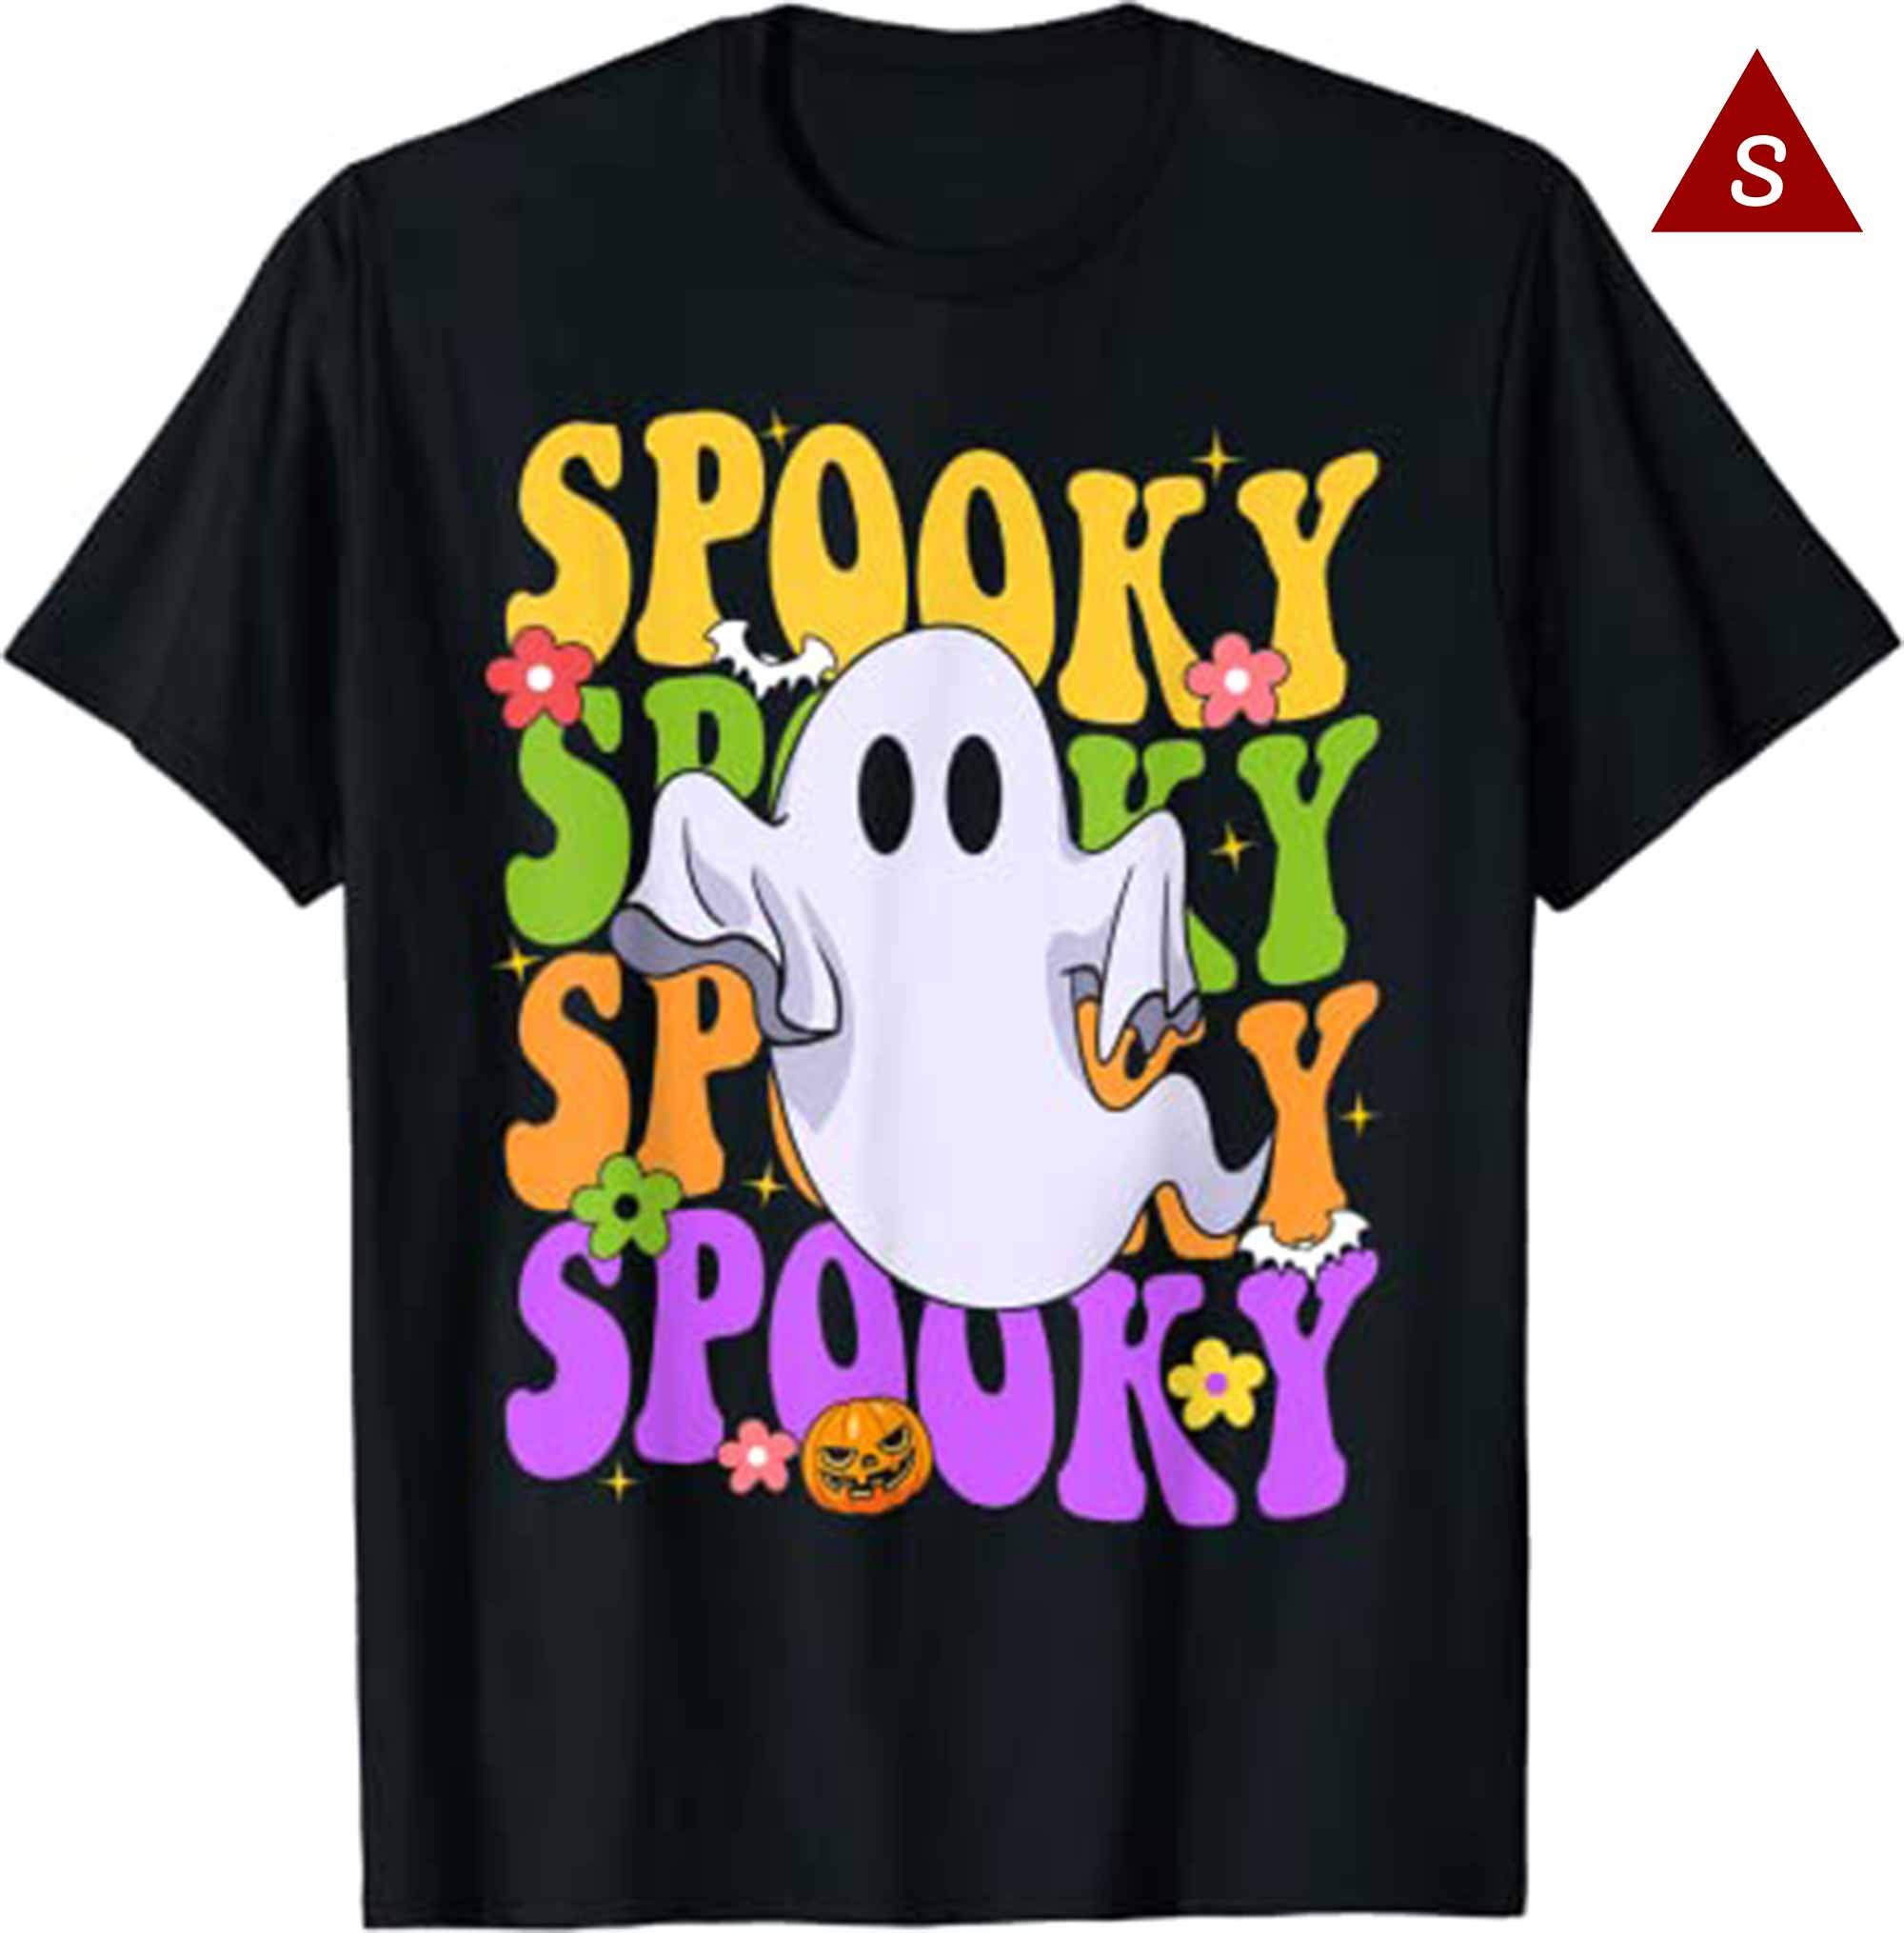 Retro Groovy Ghost Halloween Costume Shirts Spooky Vibes T Shirt